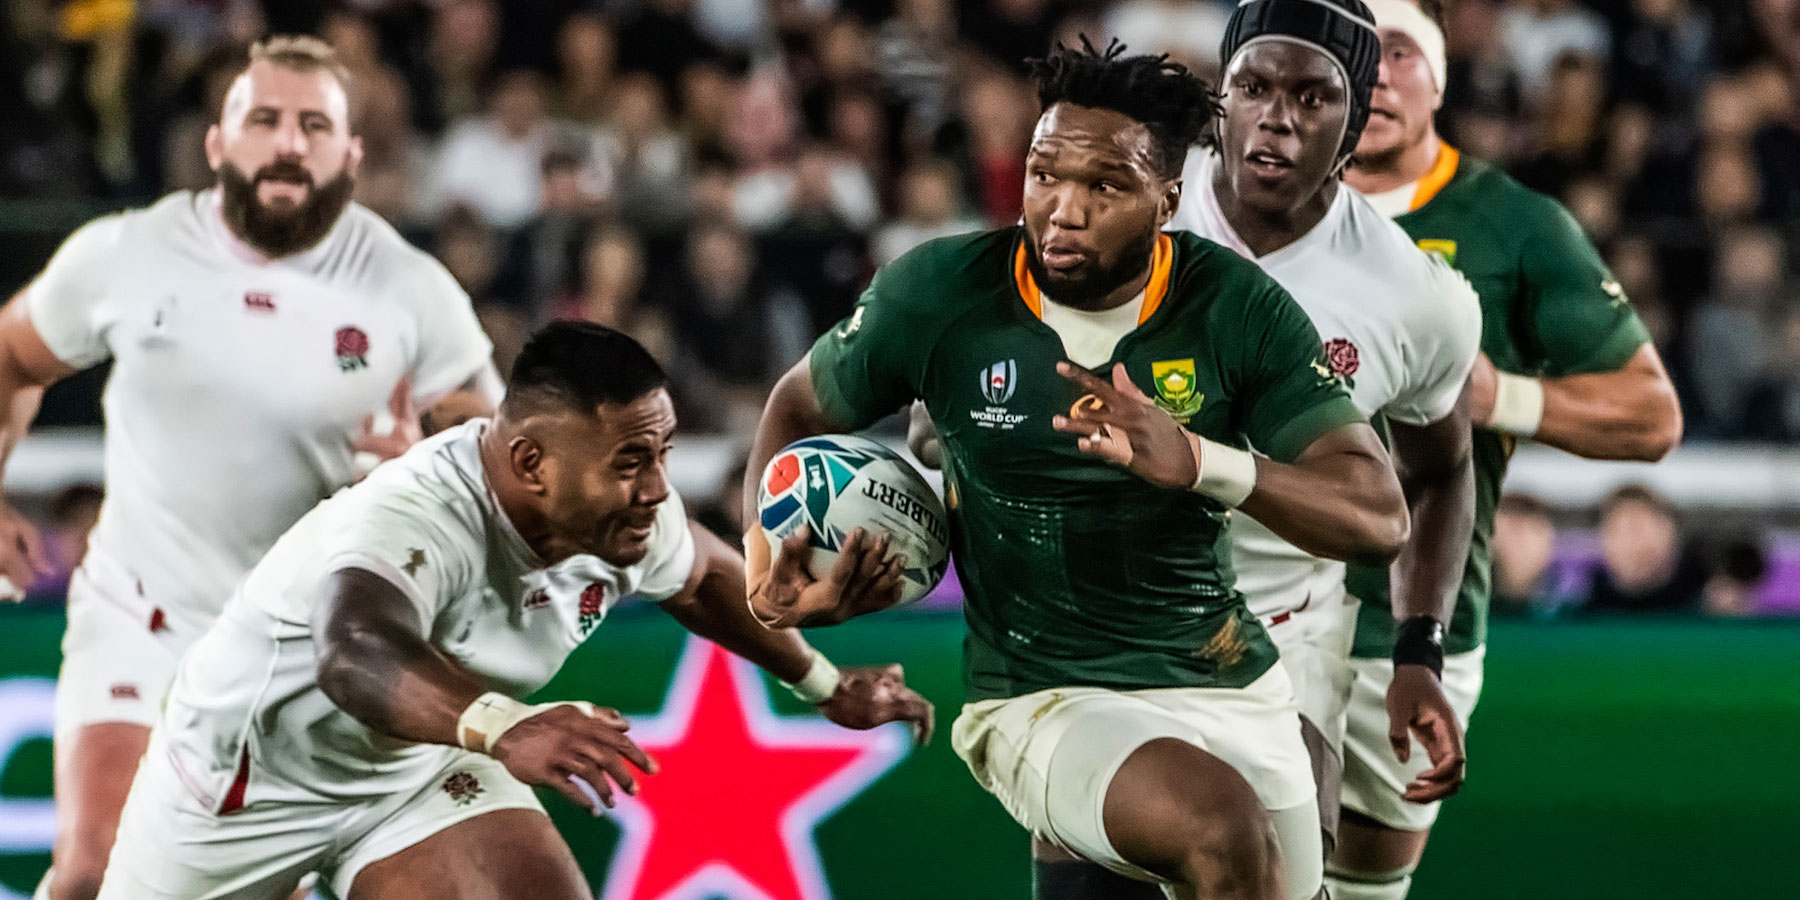 Lukhanyo Am in action against England in the RWC final in 2019.